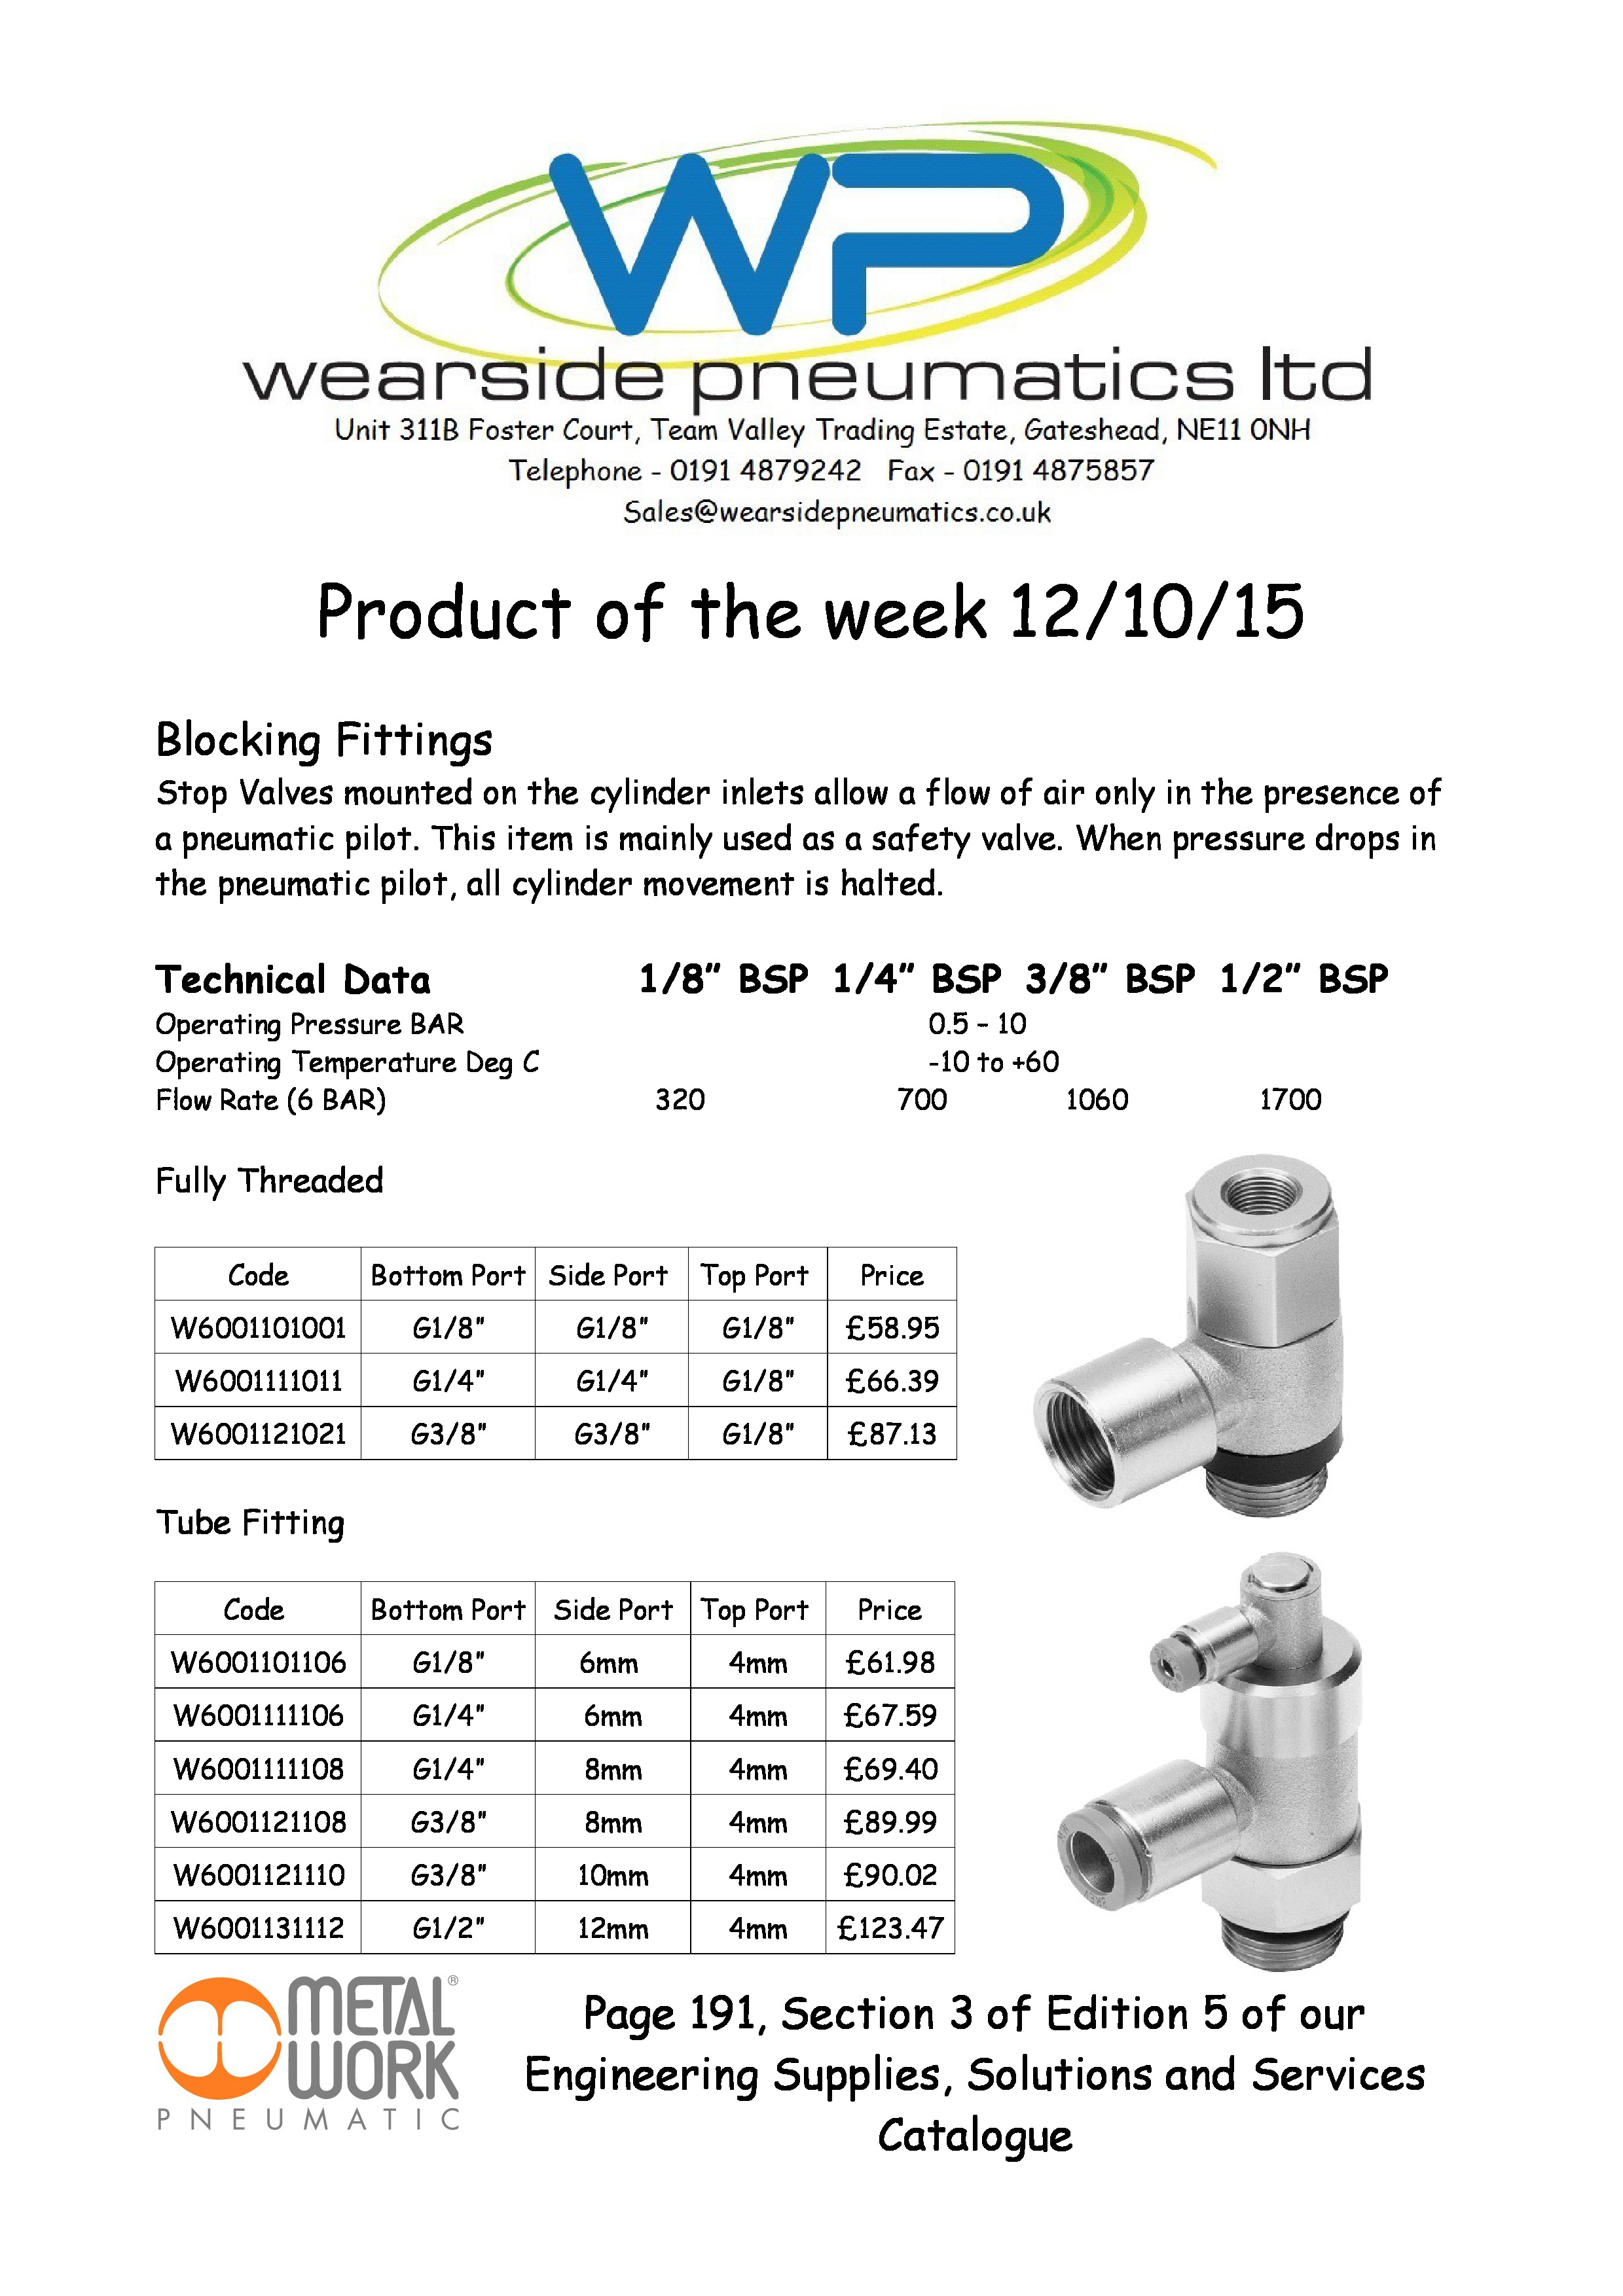 Product of the week – 12/10/15 – Blocking Fittings